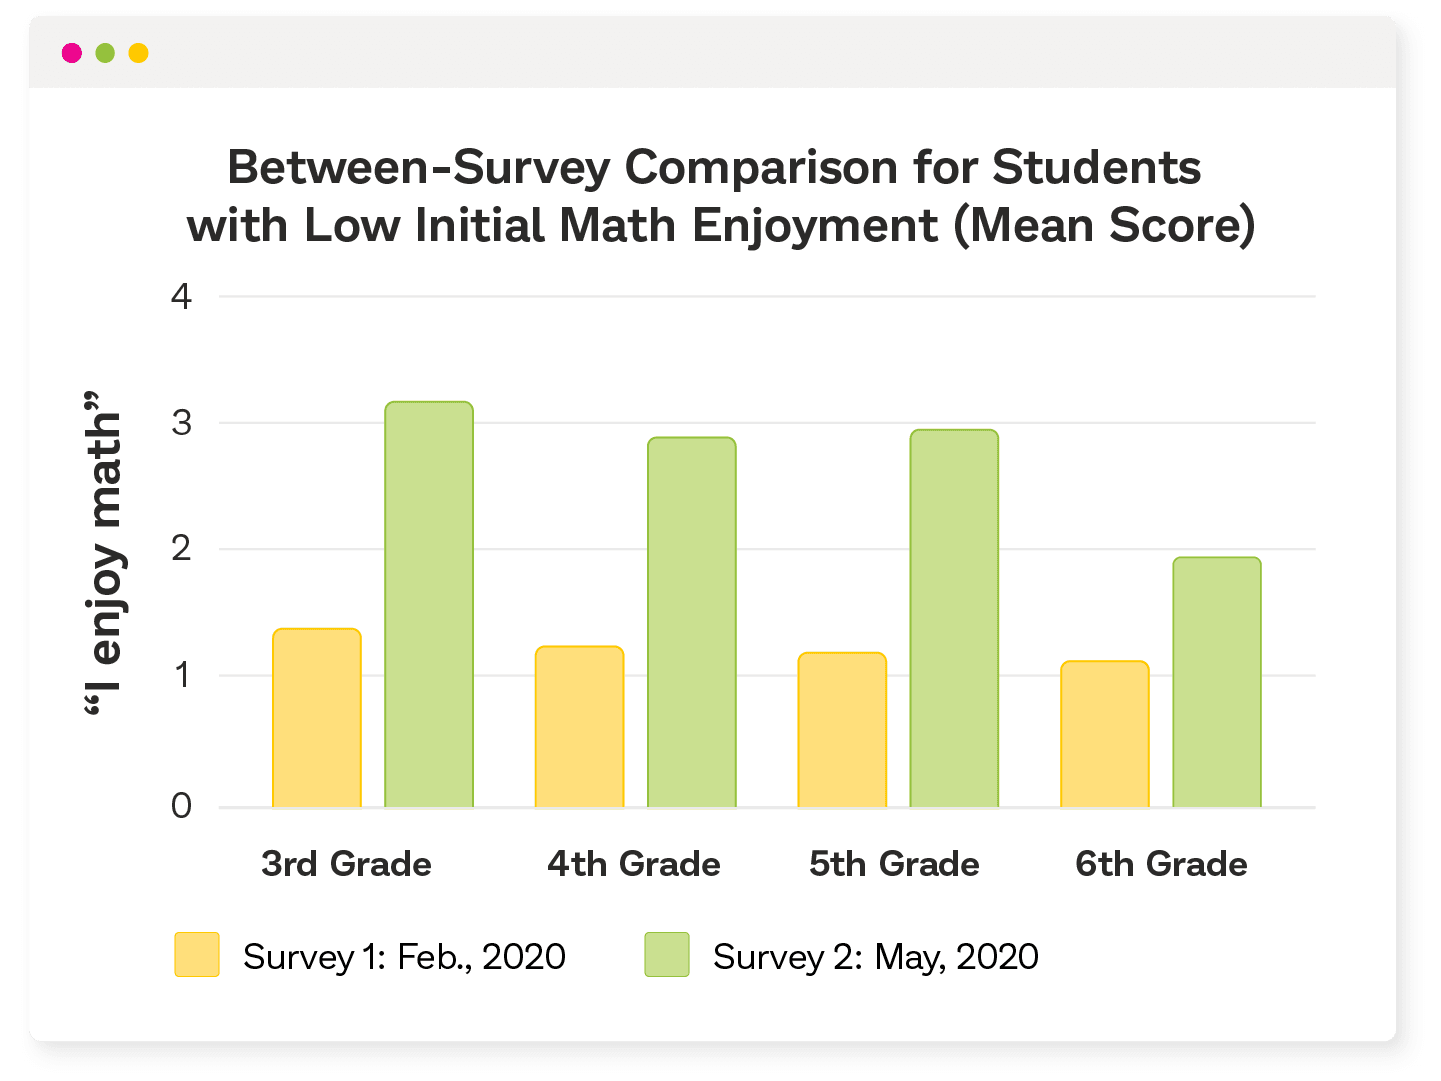 Between-survey comparison for students with low initial math enjoyment (Mean score).